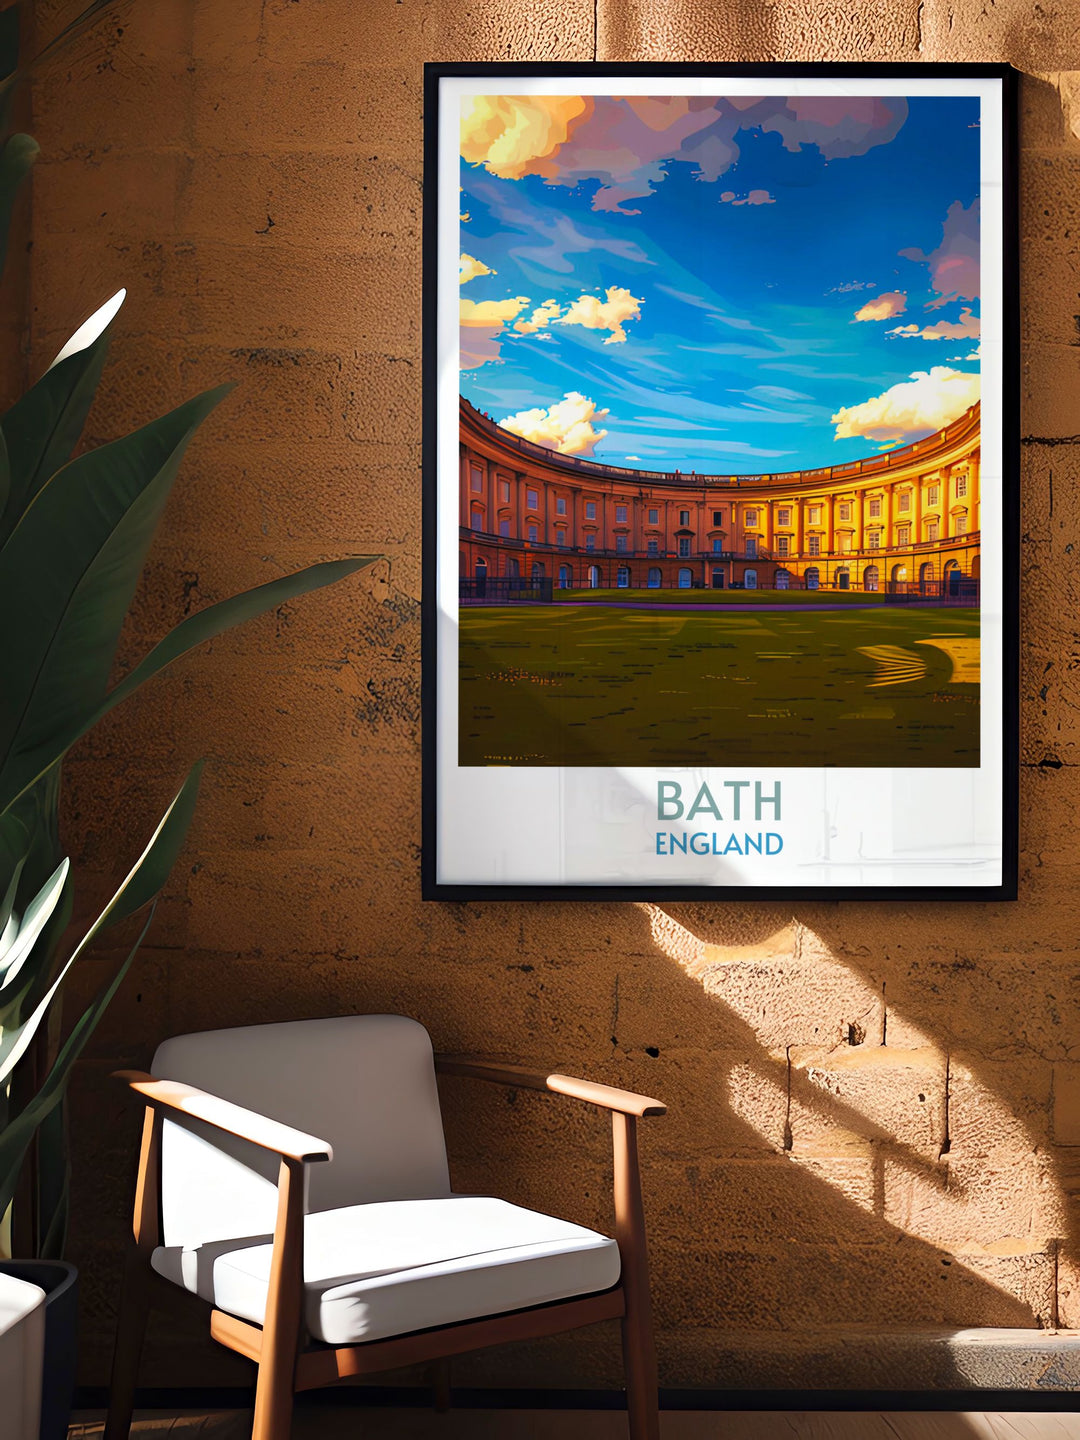 Elegant travel poster of Royal Crescent in Bath, England, ideal for those decorating with themes of English history and architecture.